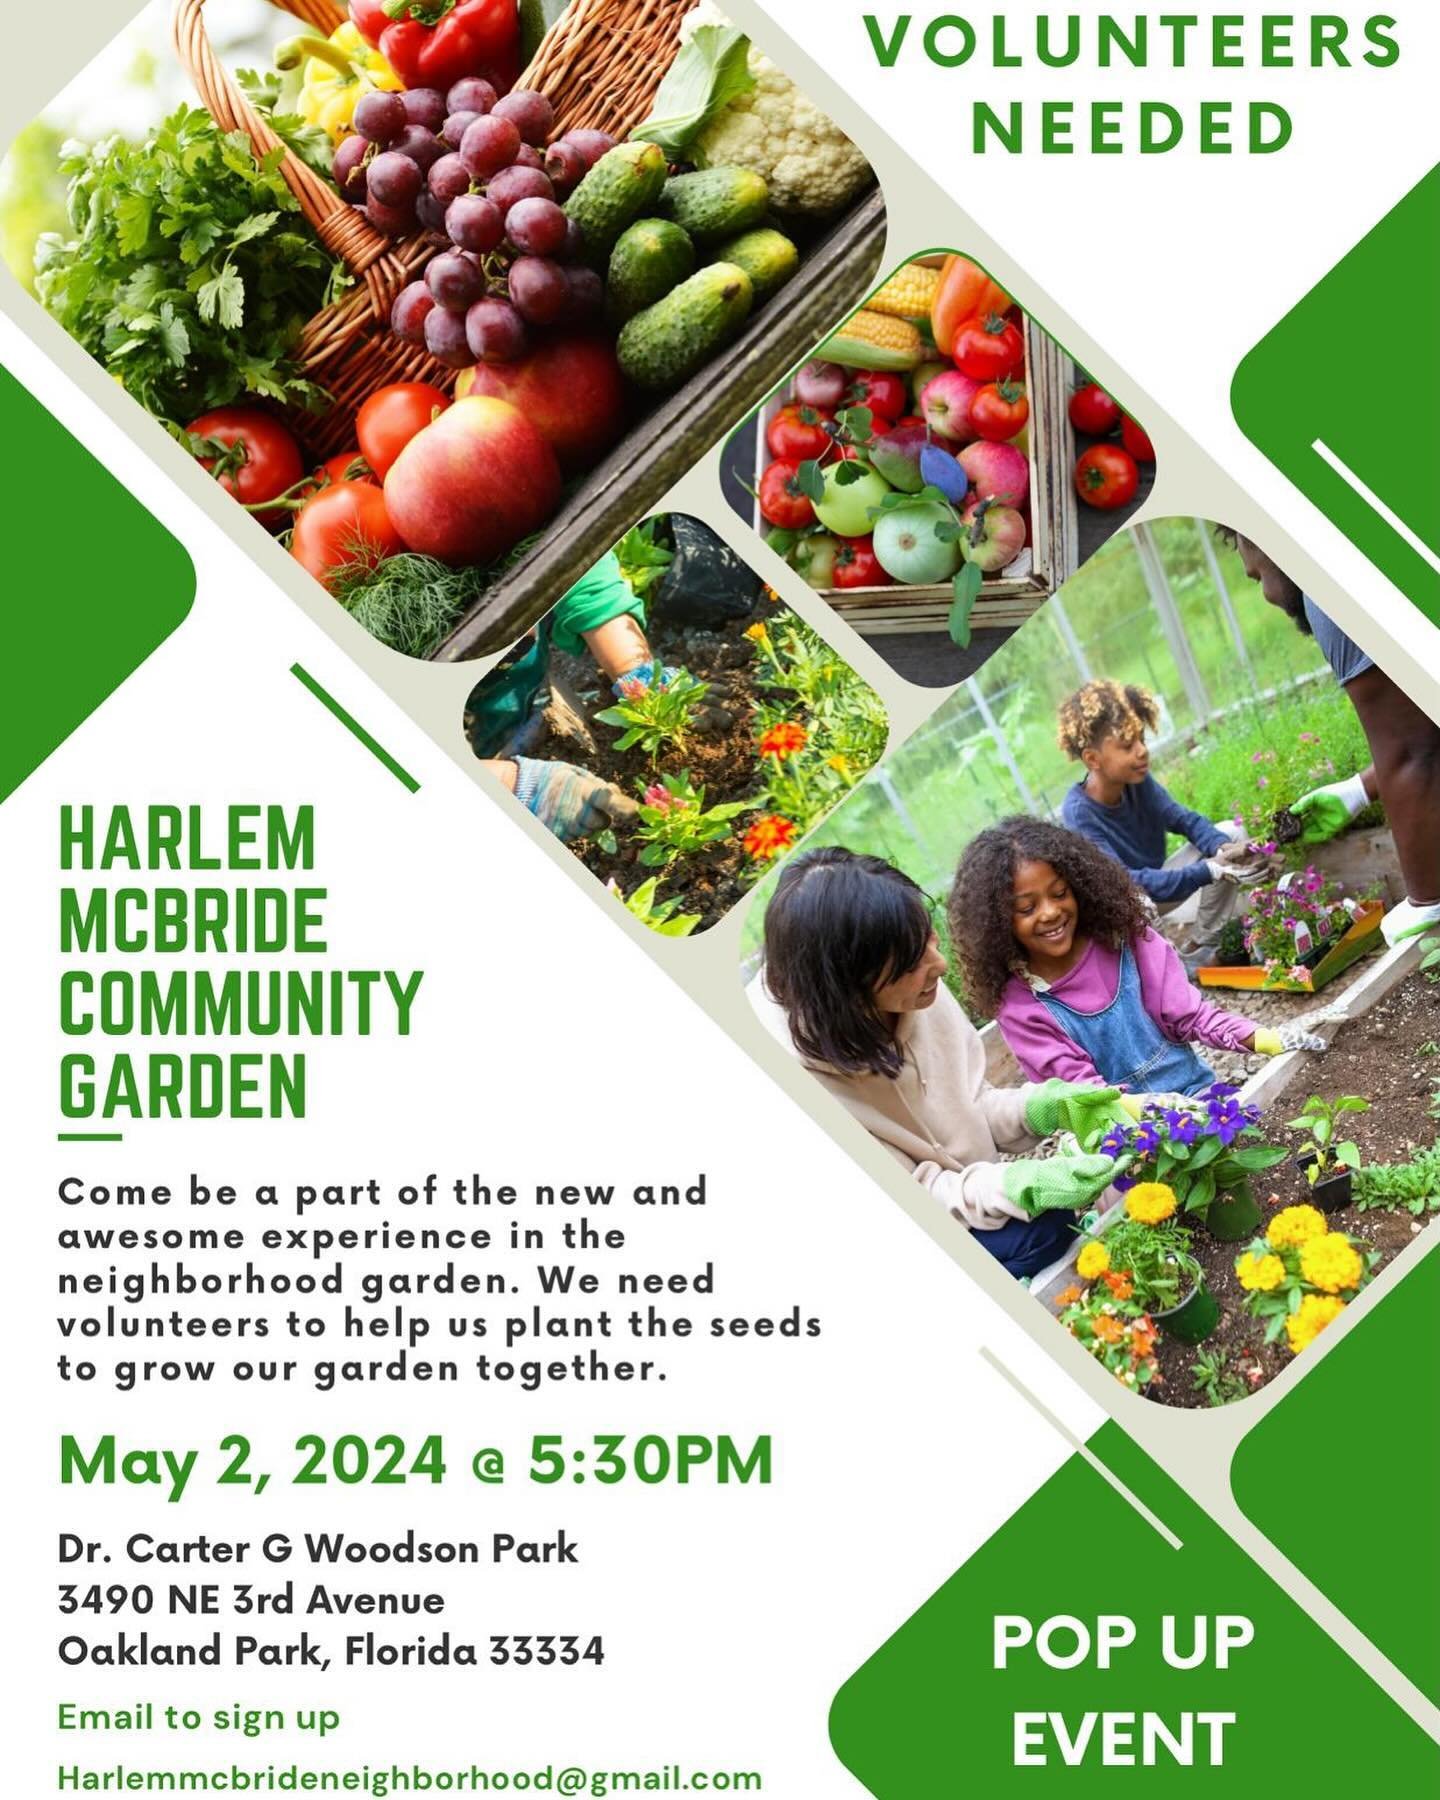 🌟Join UFI tomorrow evening for a pop up event at Dr. Carter G. Woodson Park in Oakland Park. We are getting the gardens ready for summer planting! We hope you&rsquo;ll join us to kick off the new gardens taking place at this lovely park! 🌿🪴🌾

See